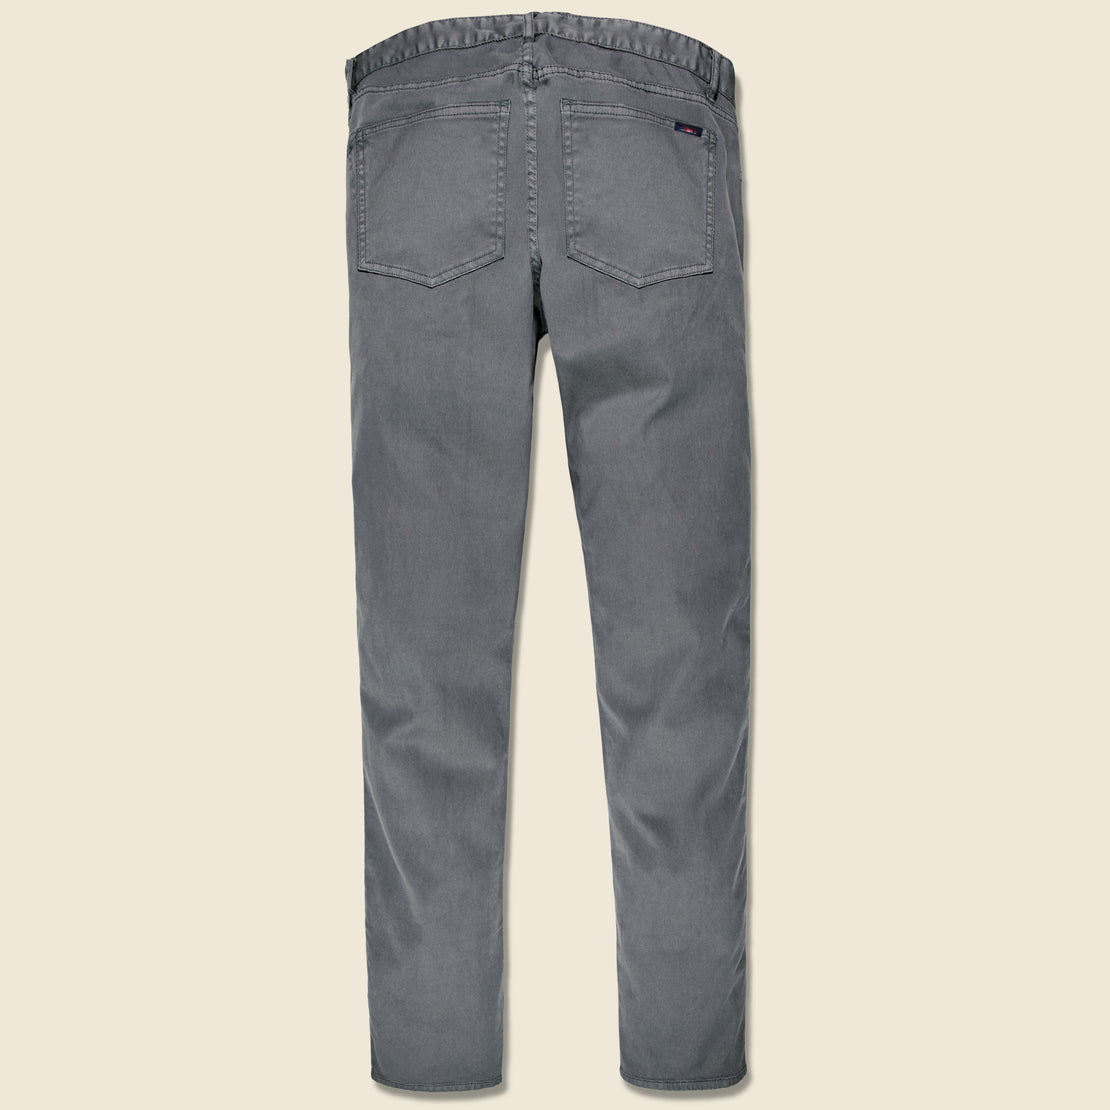 Comfort Twill Jean - Rugged Grey - Faherty - STAG Provisions - Pants - Twill